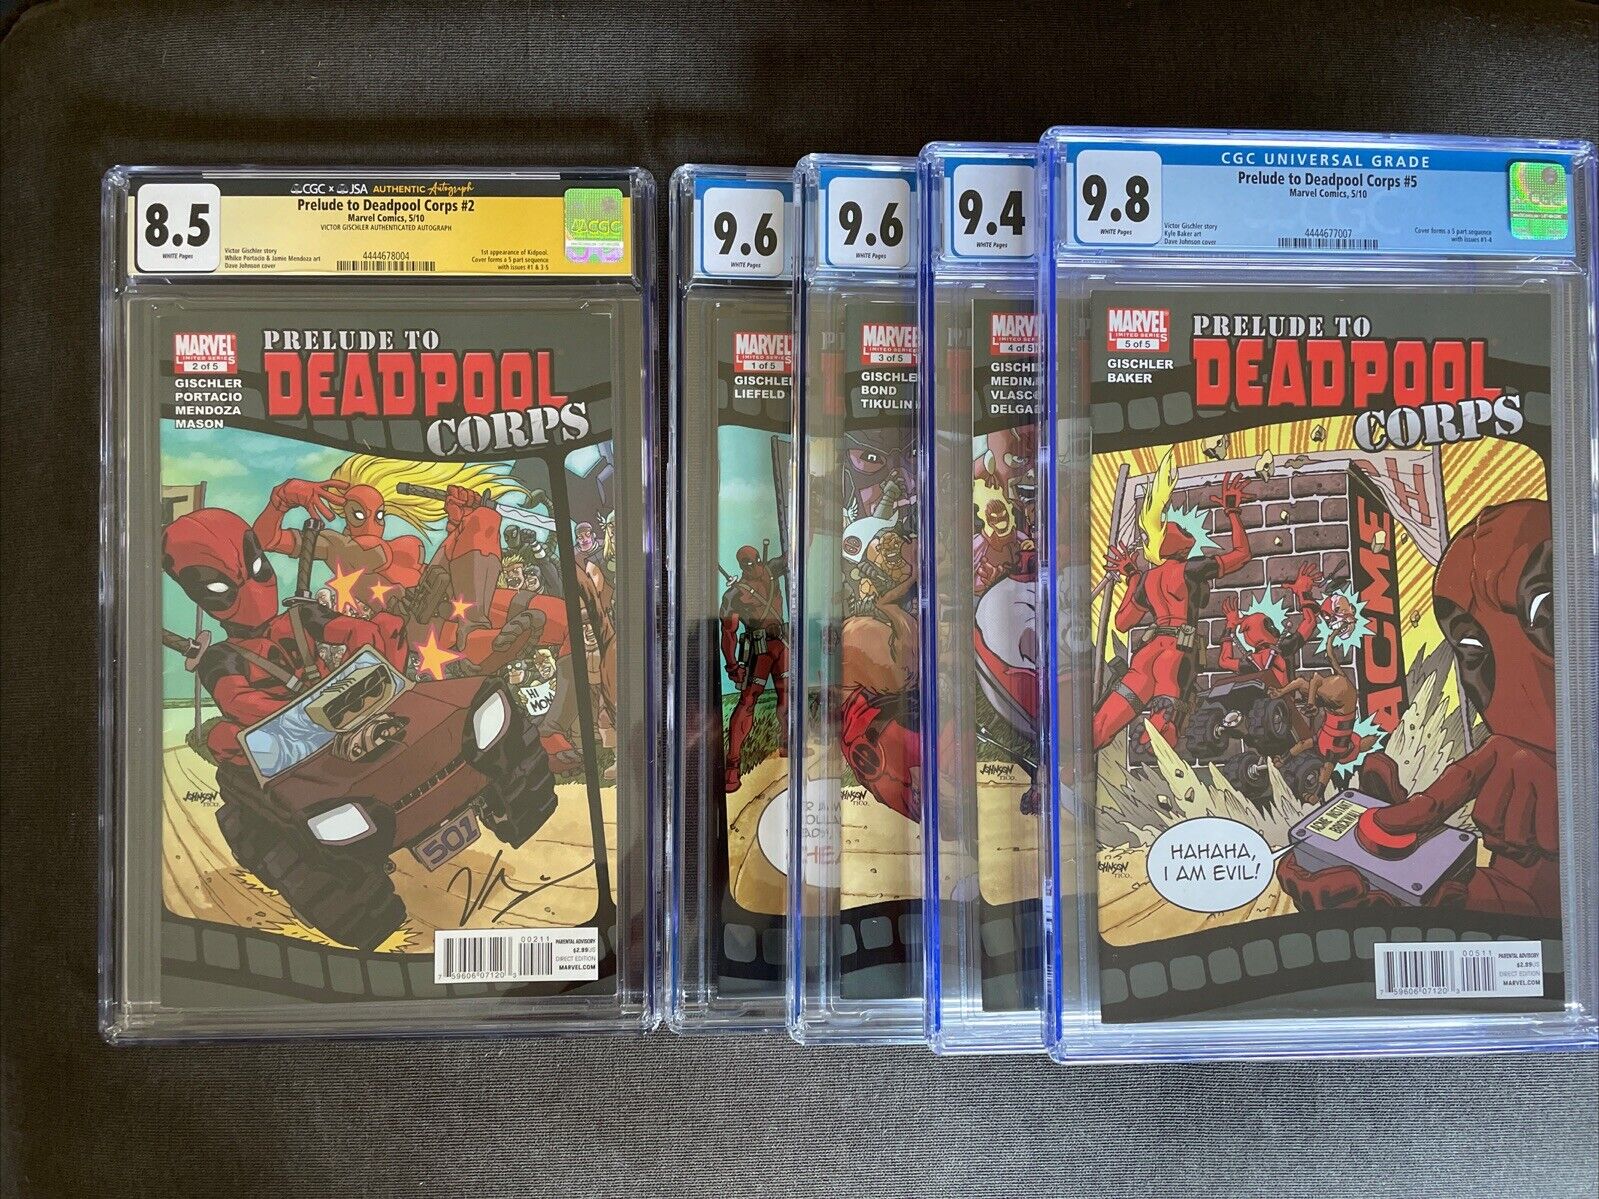 Marvel - PRELUDE TO DEADPOOL CORPS #1 #2(*SIGNED*) #3 #4 #5  - Set of CGC Comics